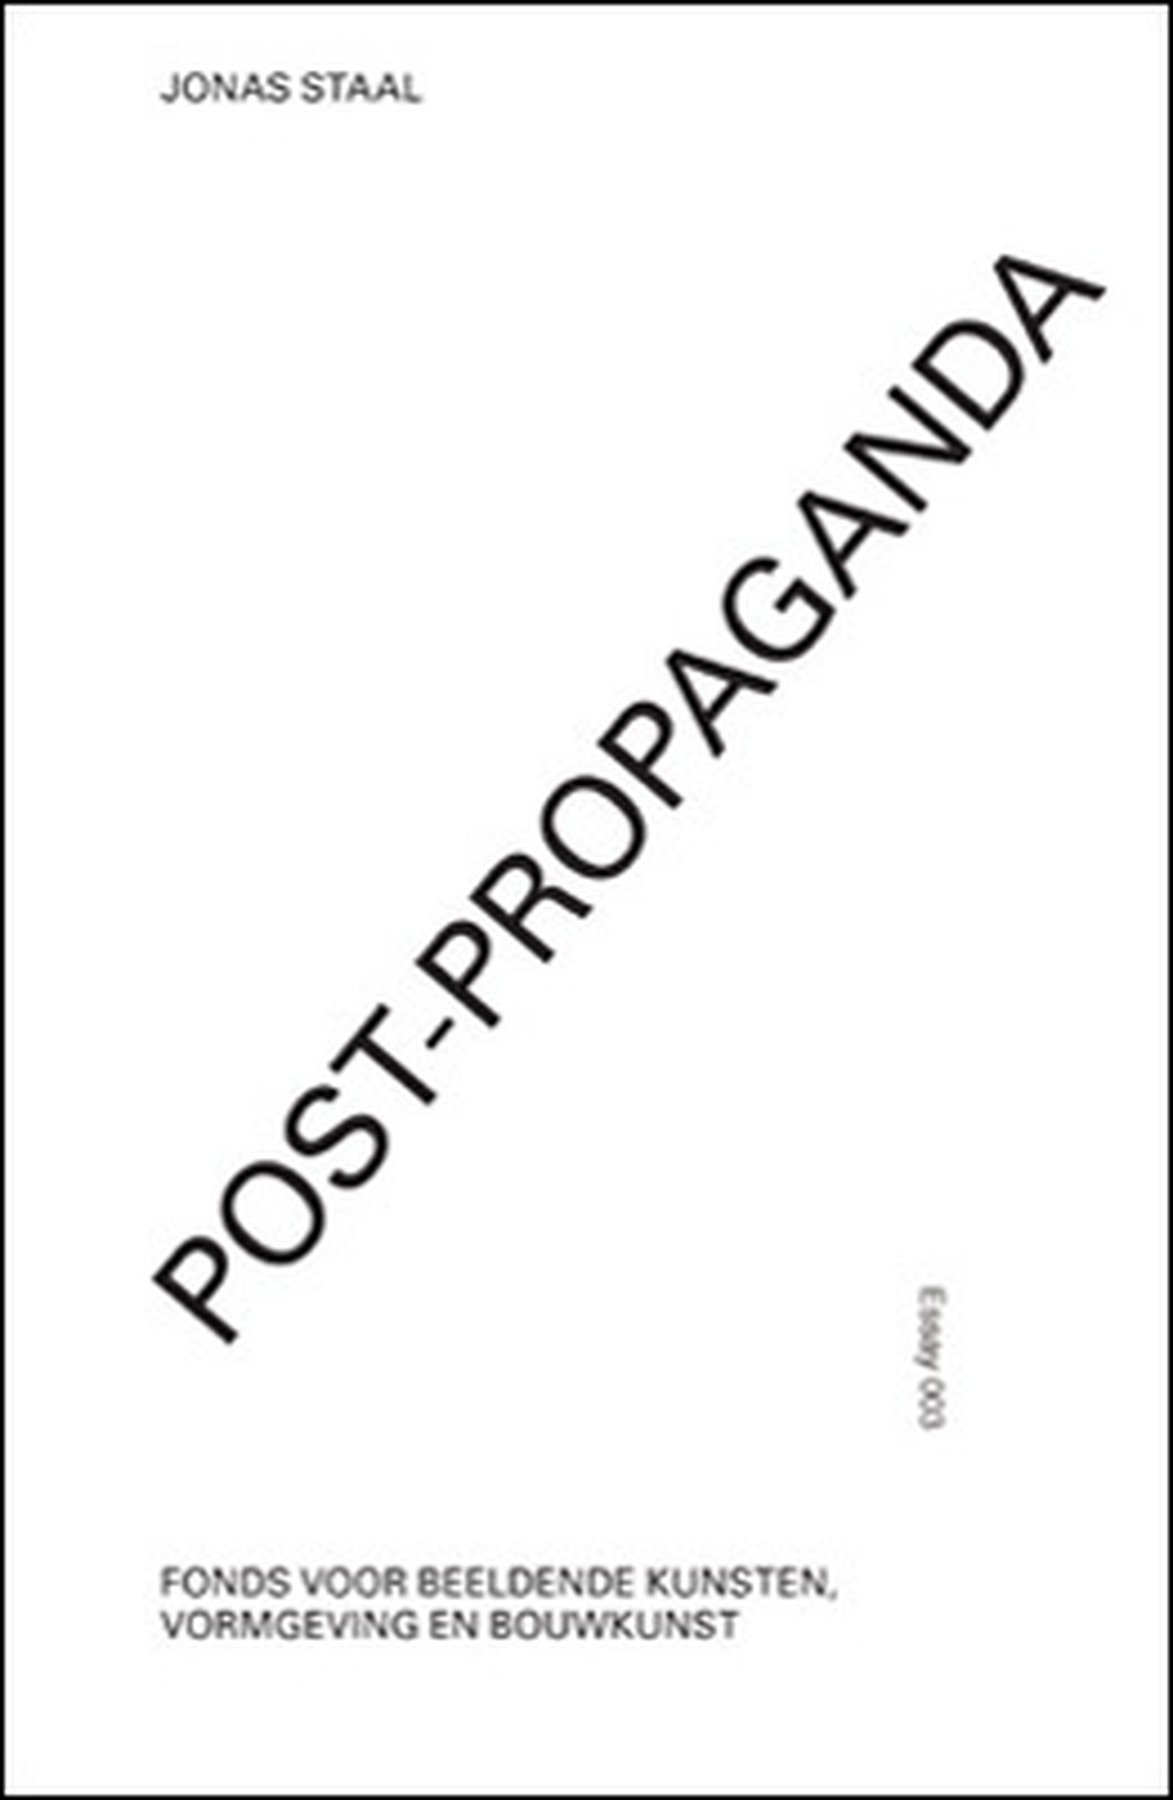 POST-PROPAGANDA. Essay on the relationship between art, politics and propaganda, written by Jonas Staal and edited by Vincent W.J. van Gerven Oei. Fonds BKVB, Amsterdam NL, 2009